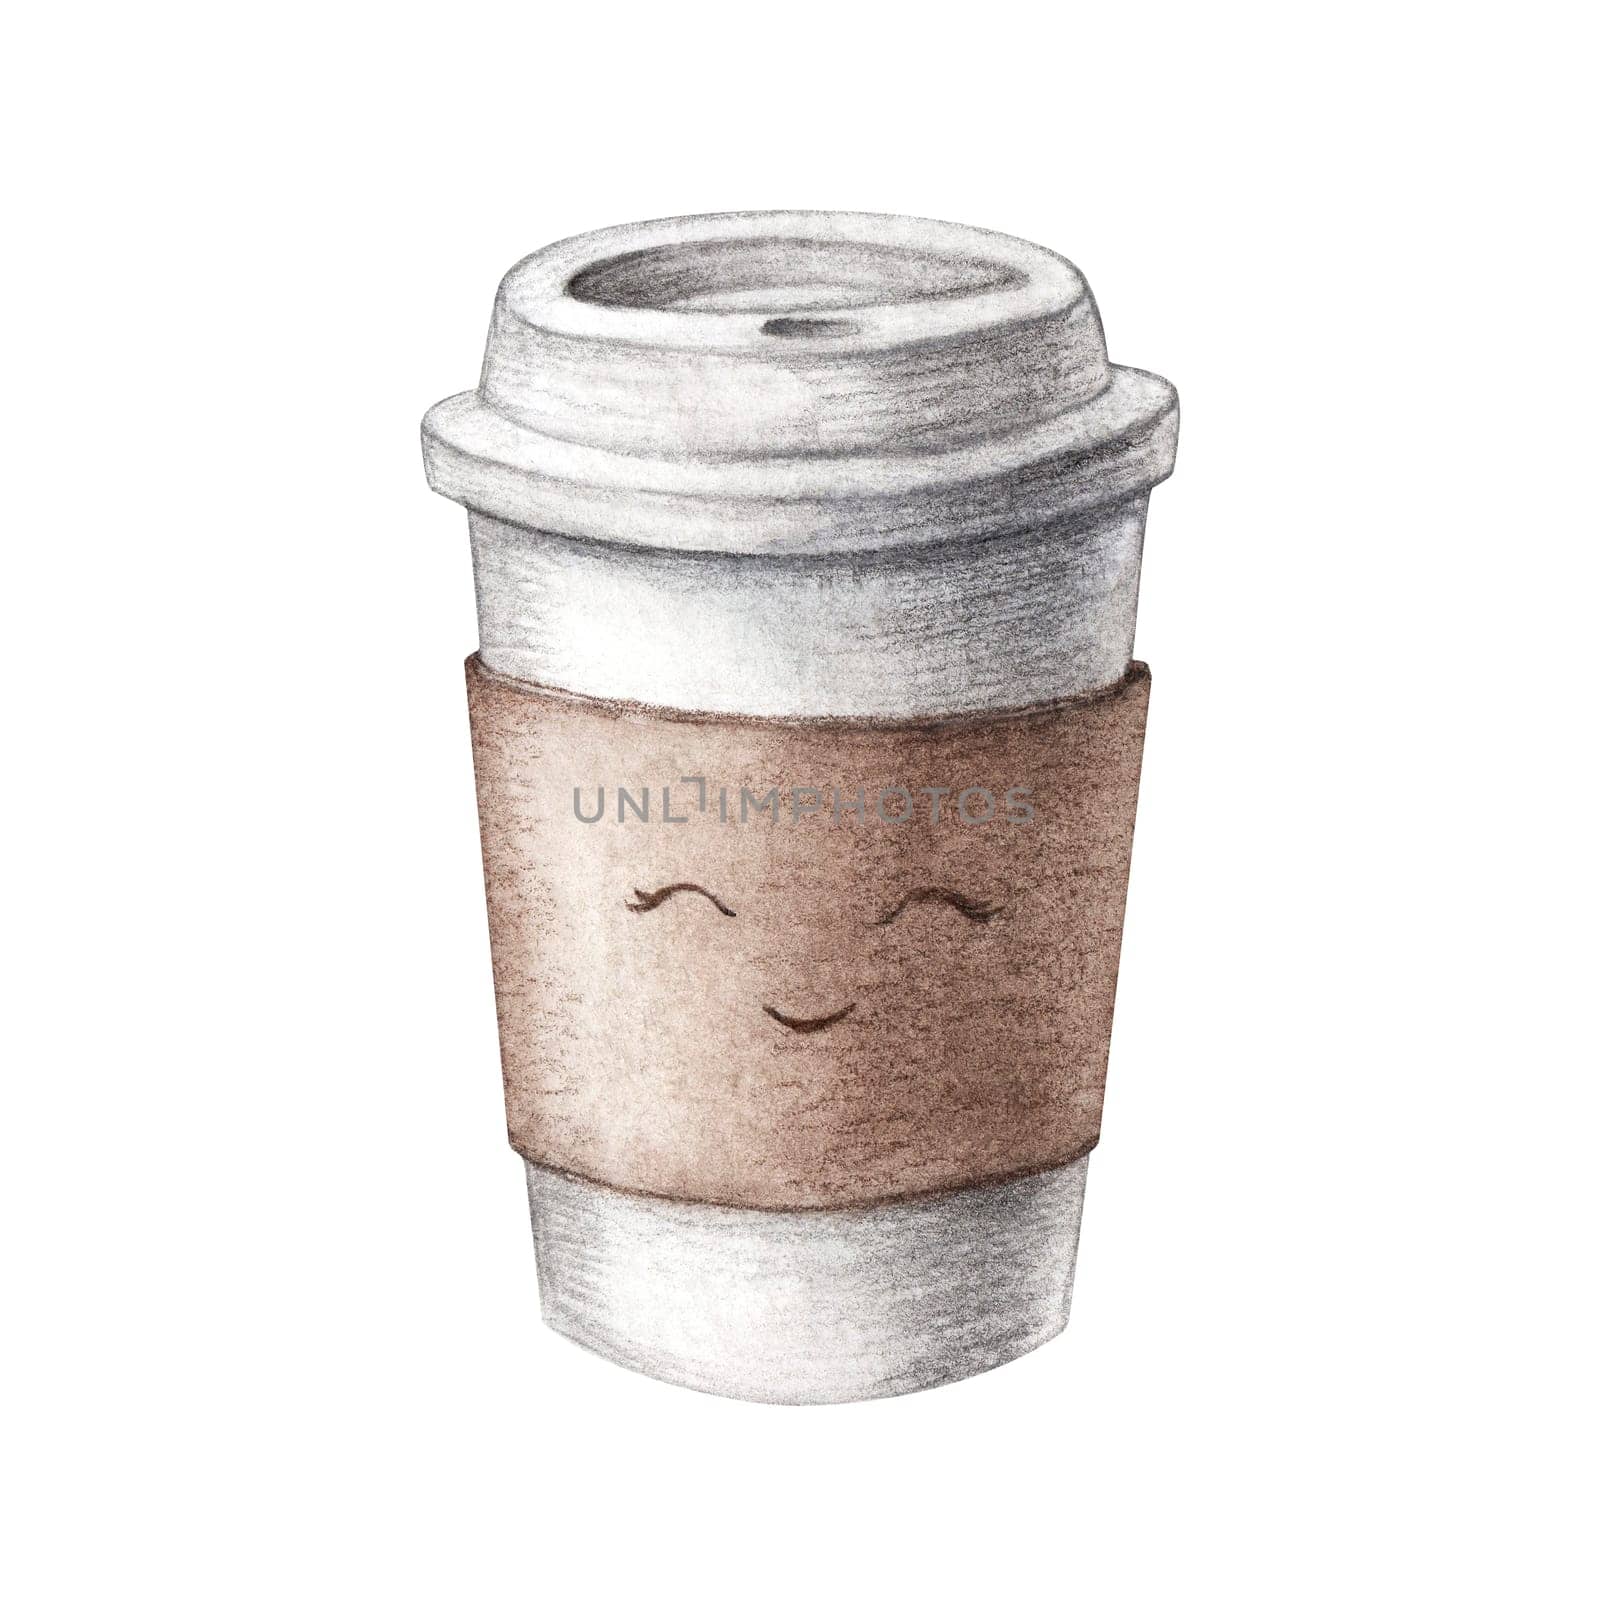 Hand drawn watercolor cardboard paper cute coffee cup, take away, isolated on white background. Food illustration, coffee to go. Watercolor painting